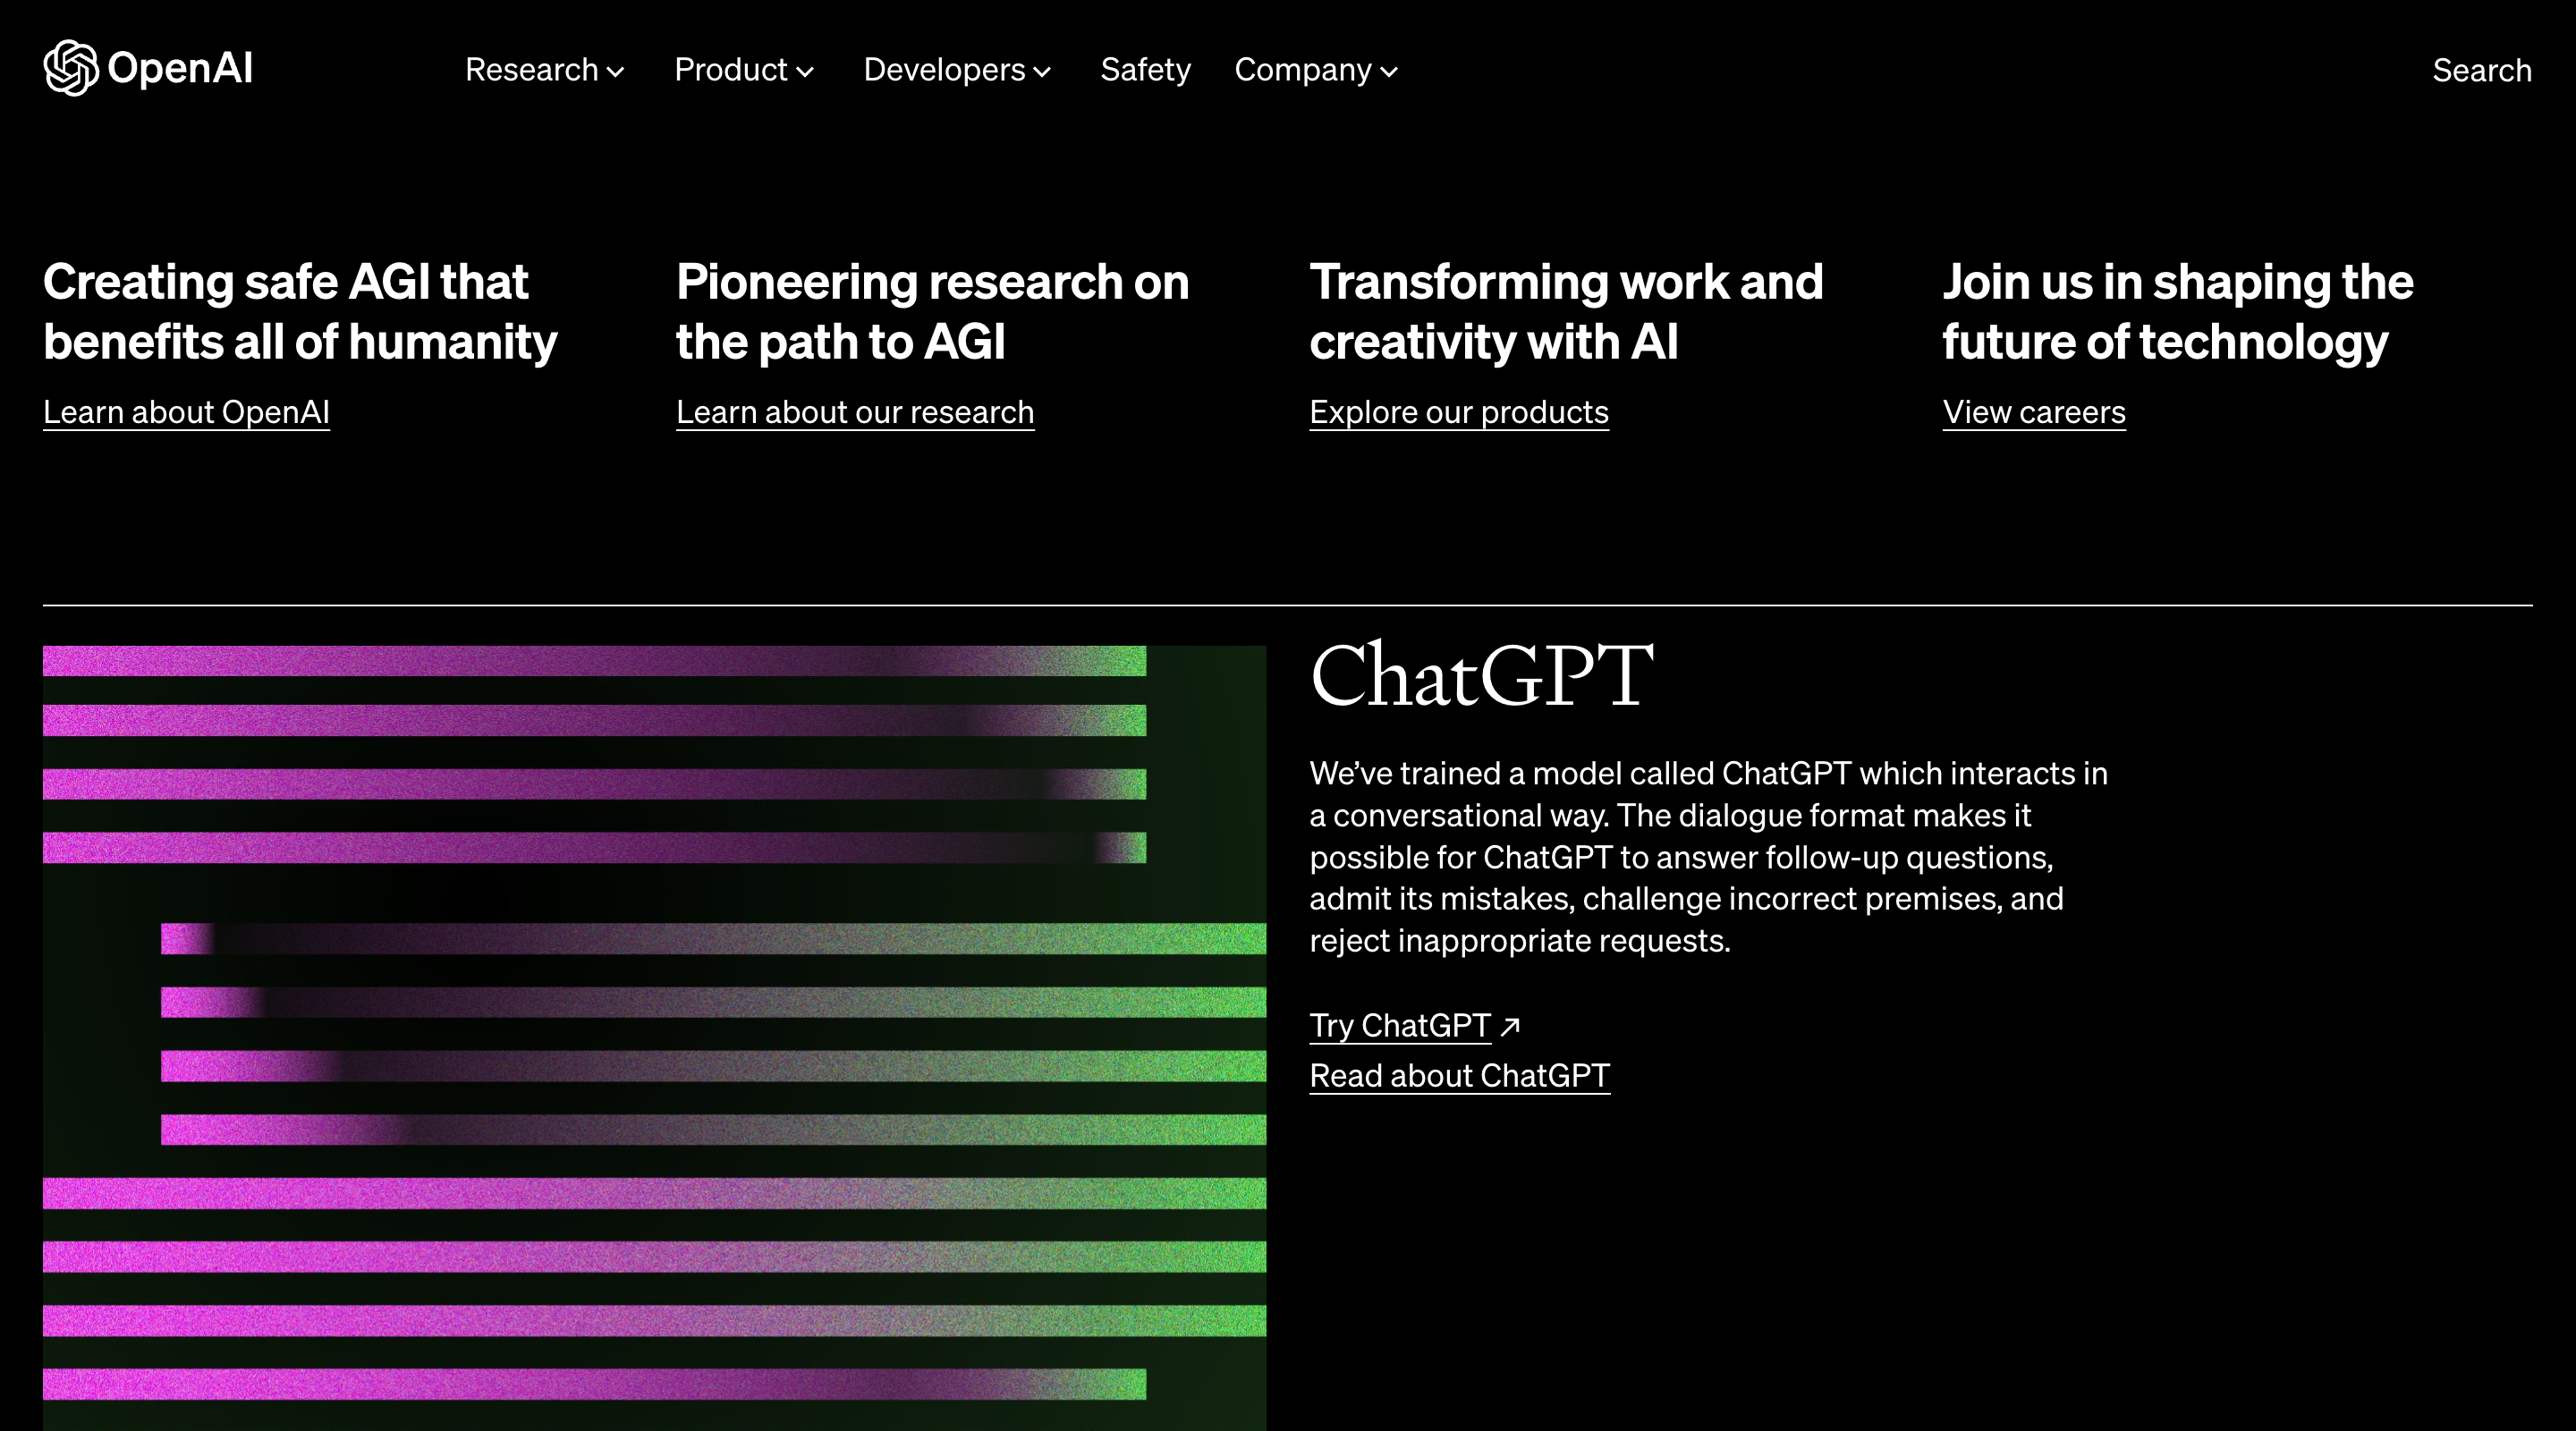 Screenshot of a section of the OpenAI website with black background and white text. It’s horizontally split in two. The top section contains headlines for the four main areas of the website with a call-to-action link below. The bottom section has a cool graphic with colored lines in grainy, gradient colors going from purple to green on the left side and a description of ChatGPT on the right side. There are call-to-action links to try or read about ChatGPT below the description.